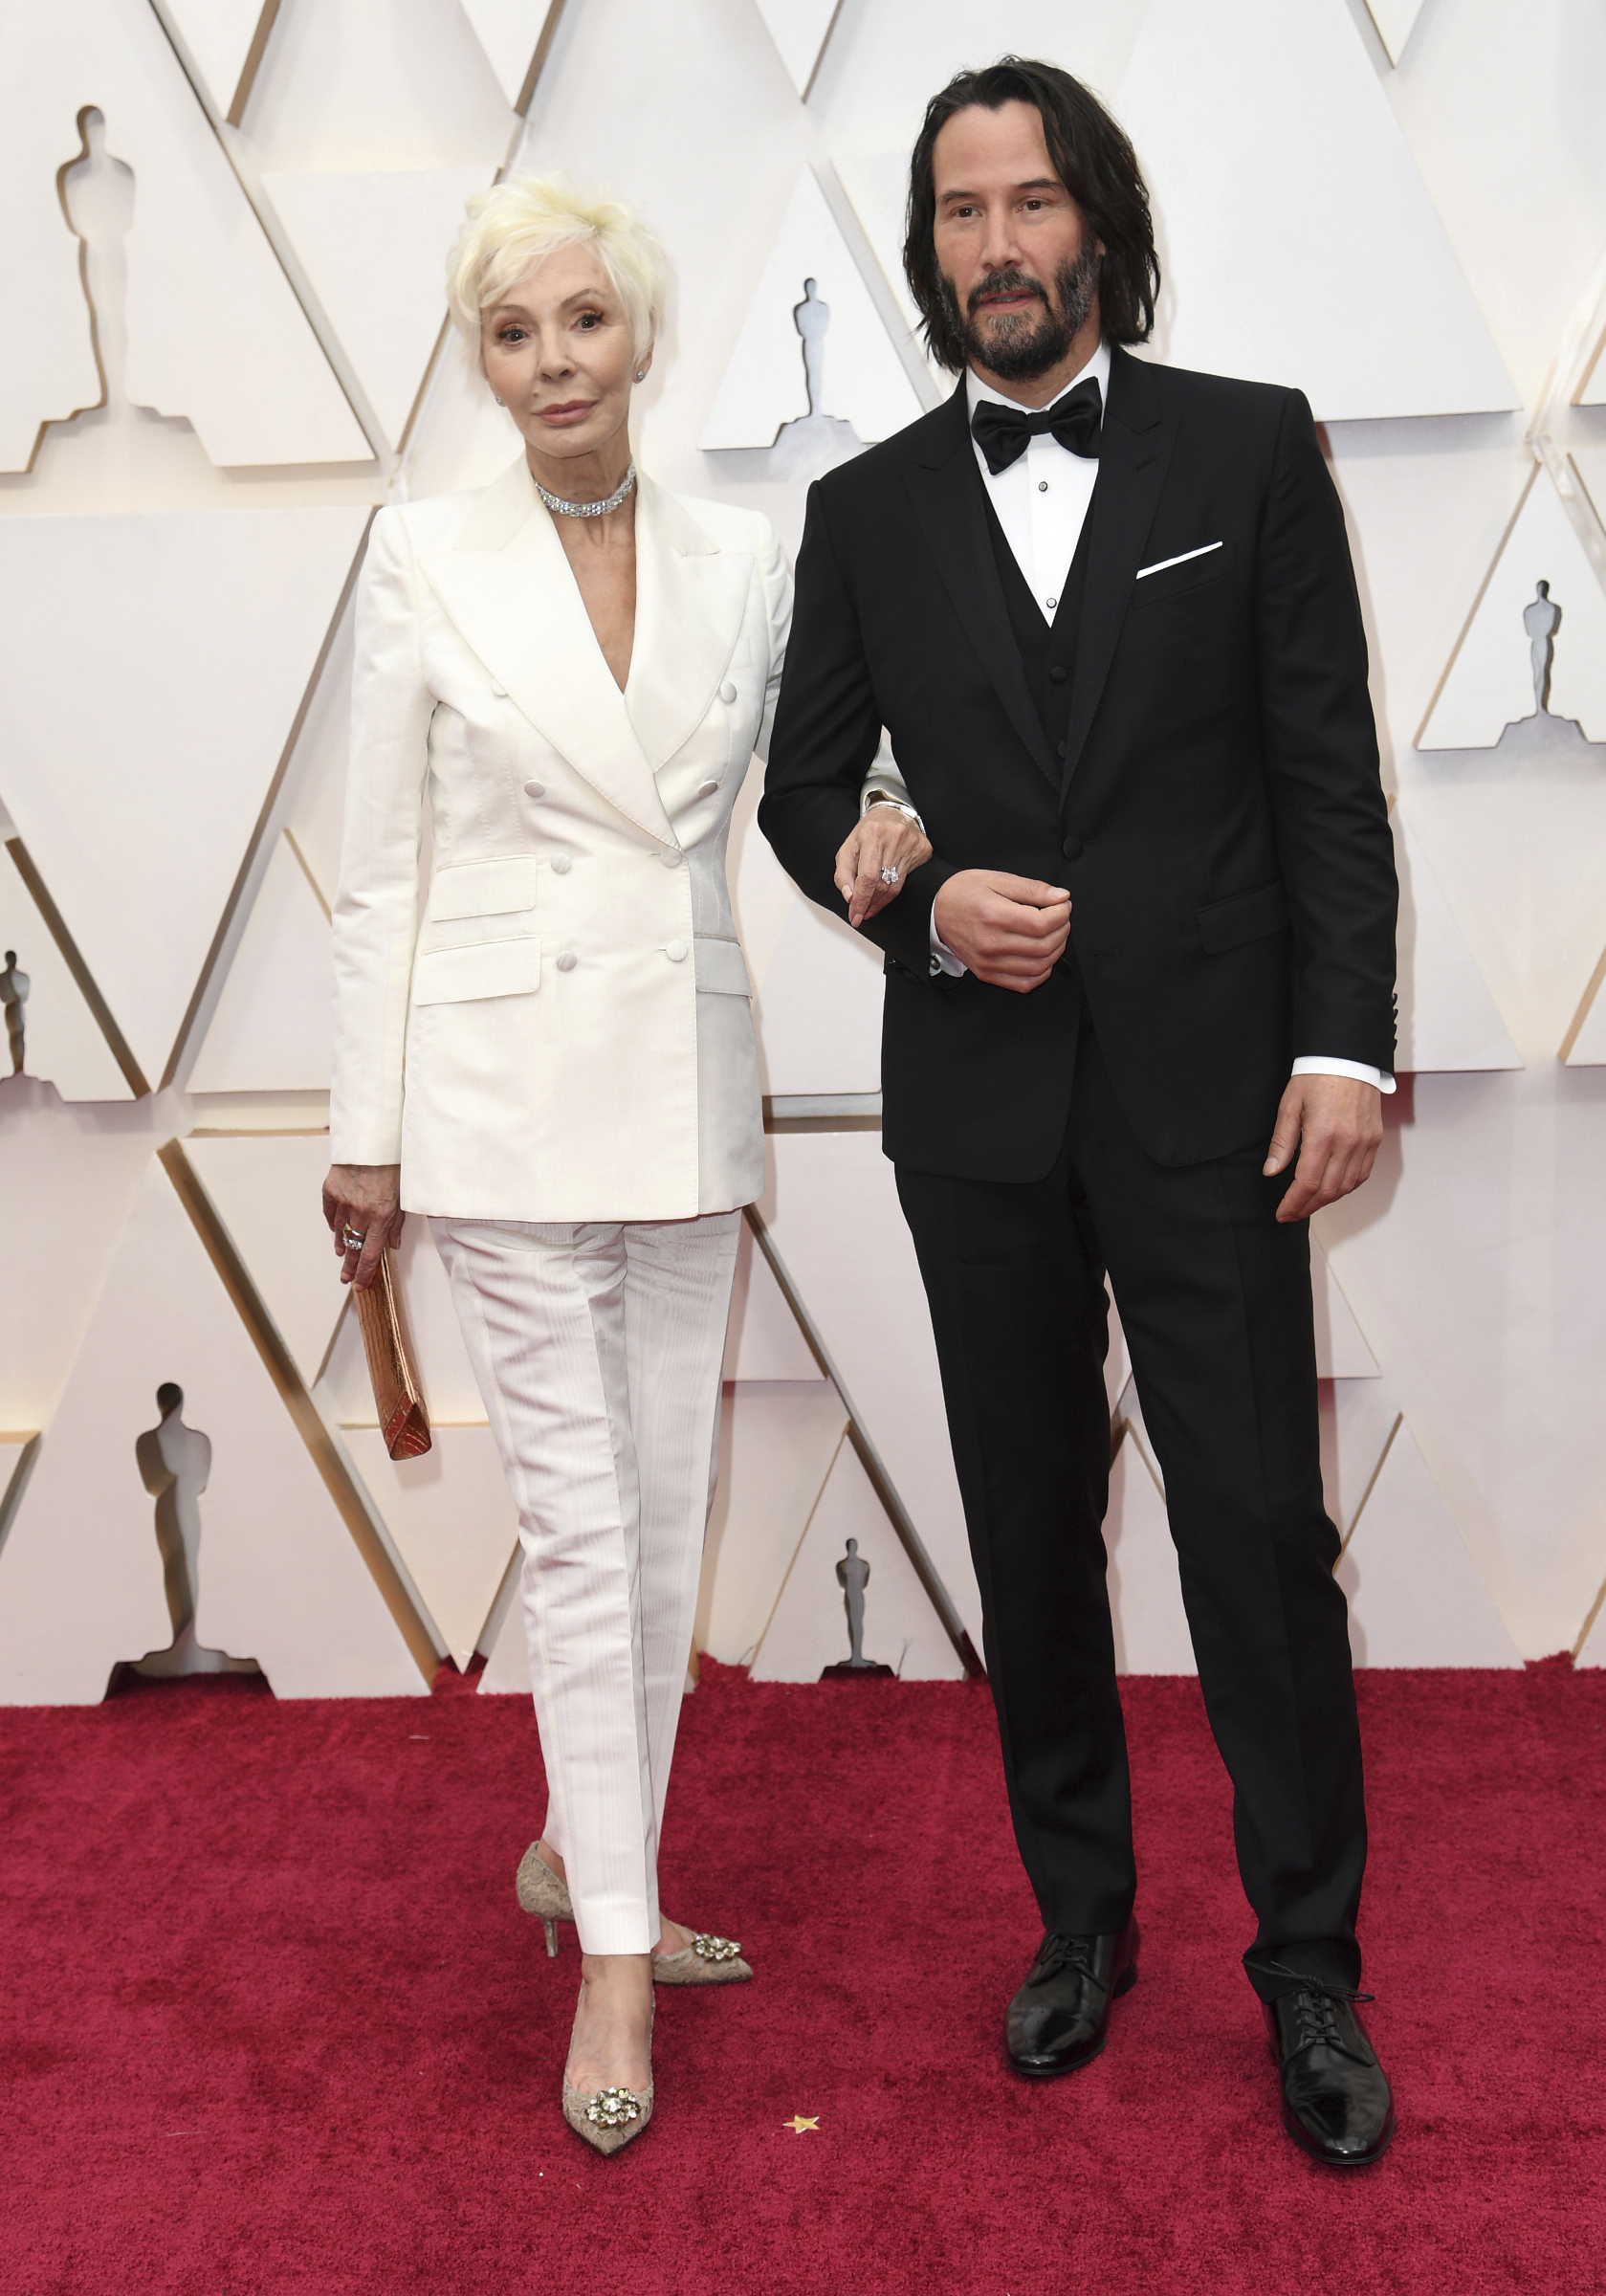 PHOTO: Patricia Taylor and Keanu Reeves arrive at the Oscars, Feb. 9, 2020, in Hollywood, Calif.